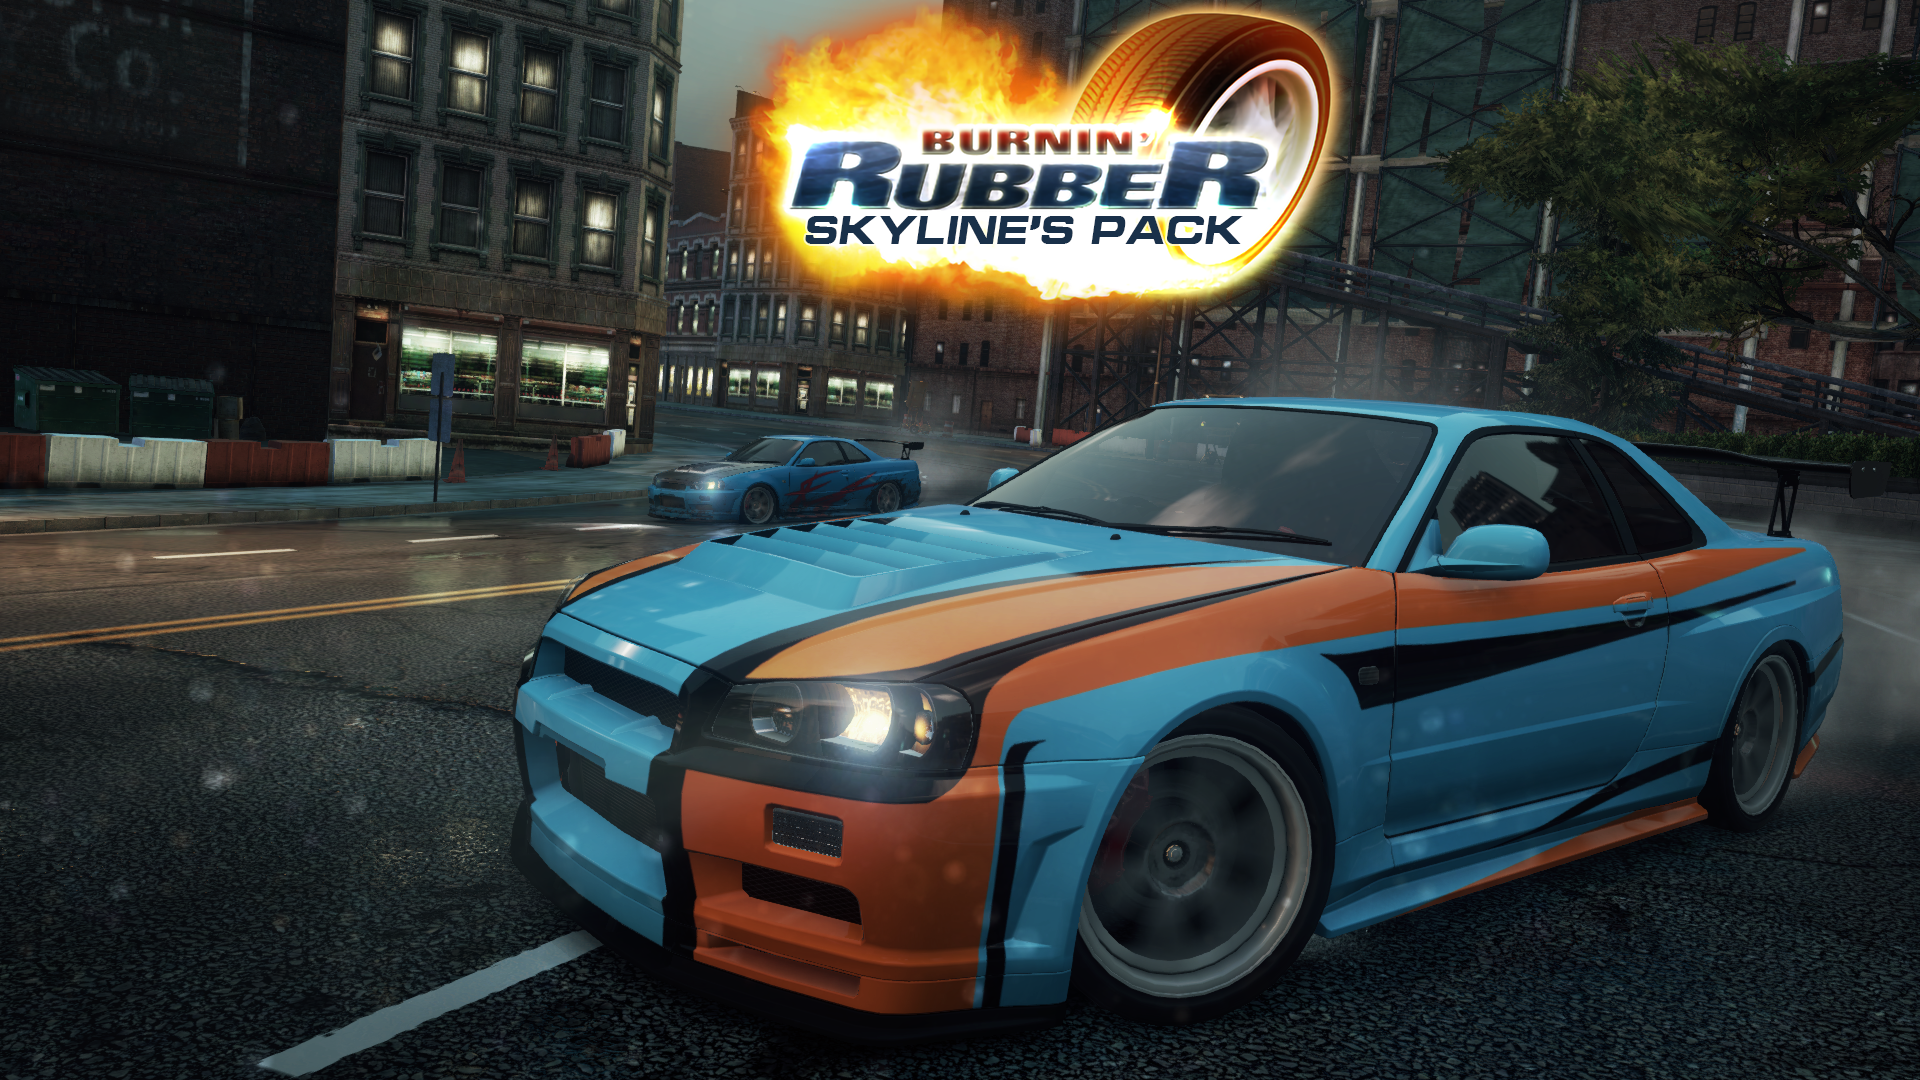 Need For Speed Most Wanted 2012 Burnin' Rubber Skyline's Pack